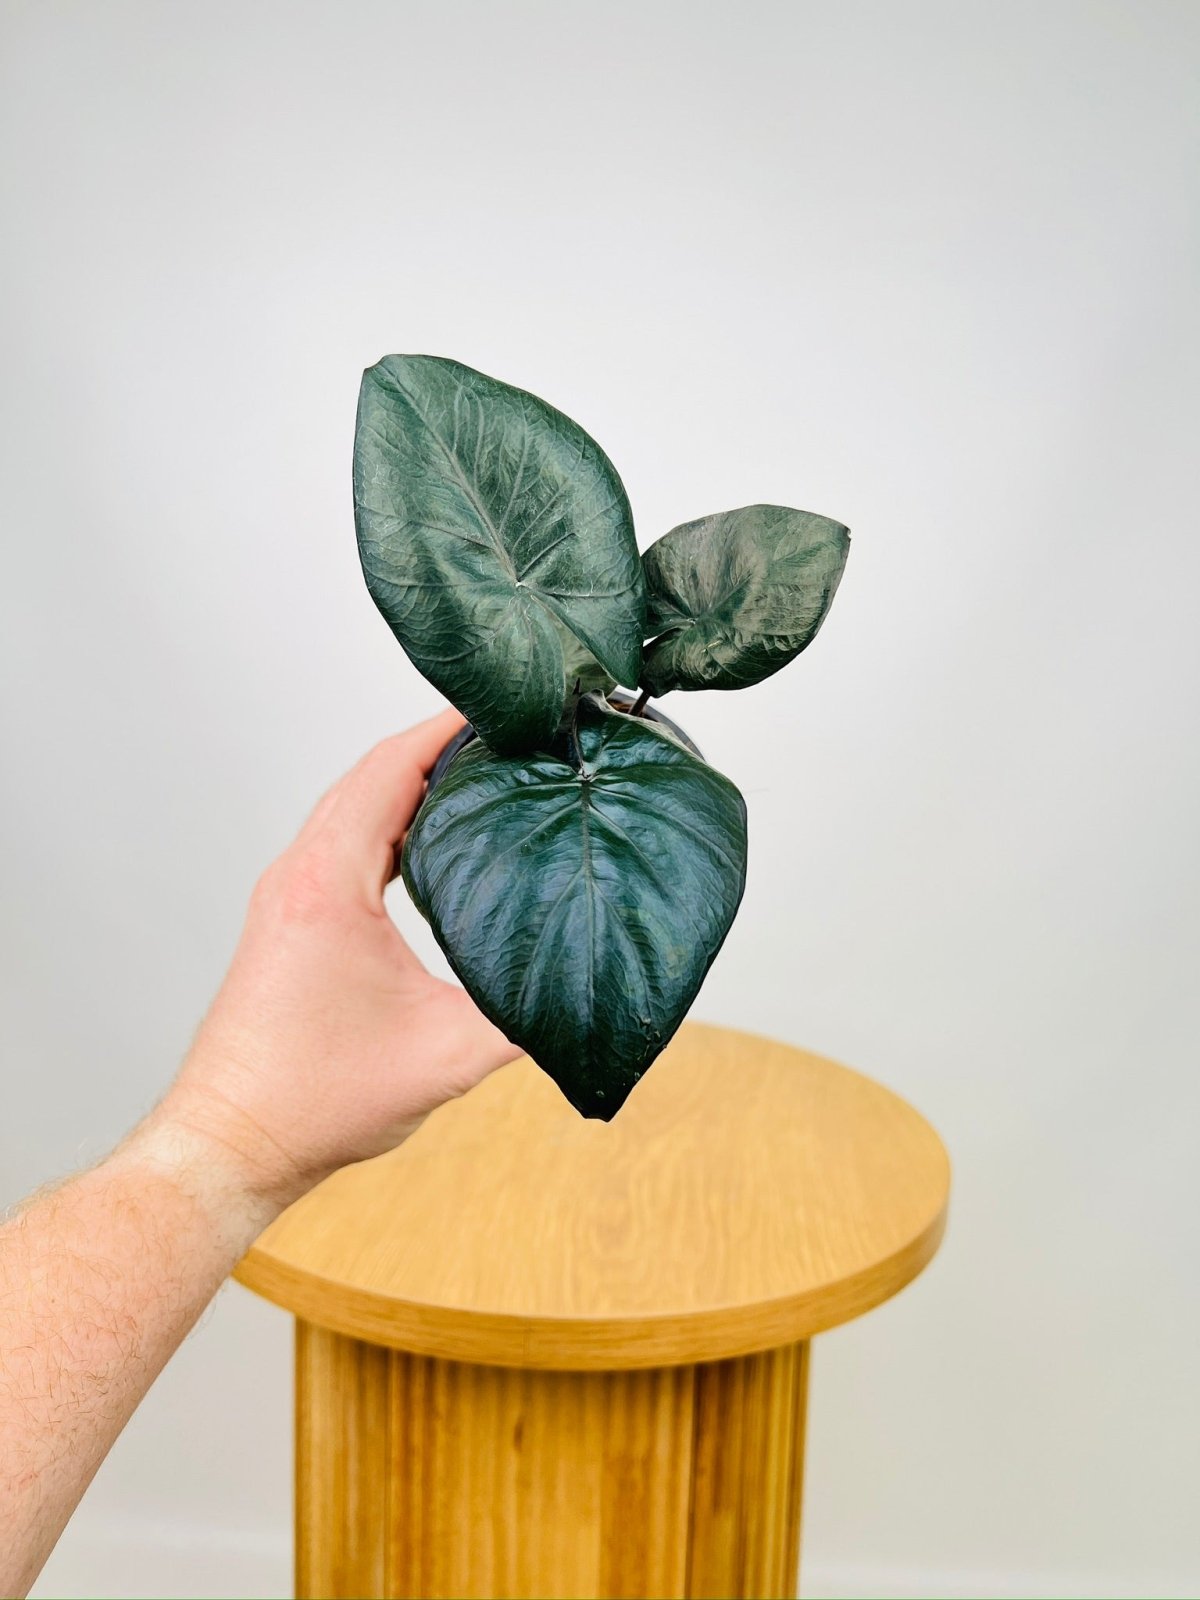 Alocasia Serendipity | Uprooted